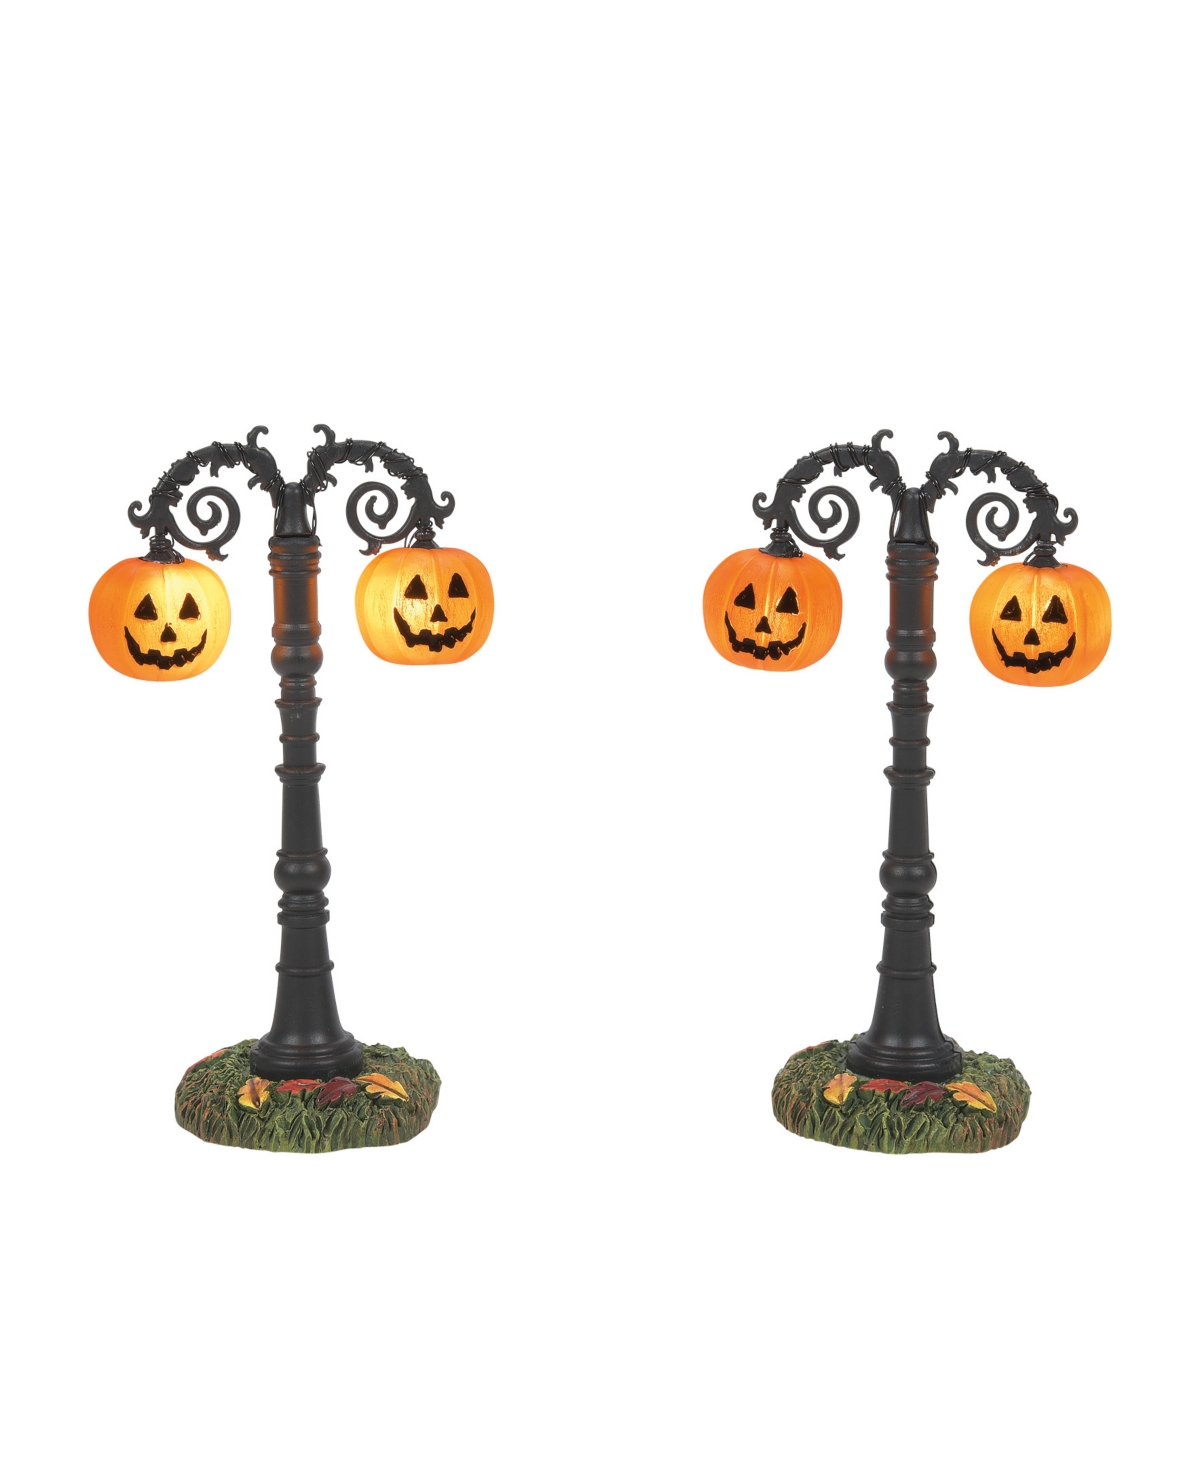 Department 56 Hallows Eve Lit Street Lamps In Multi